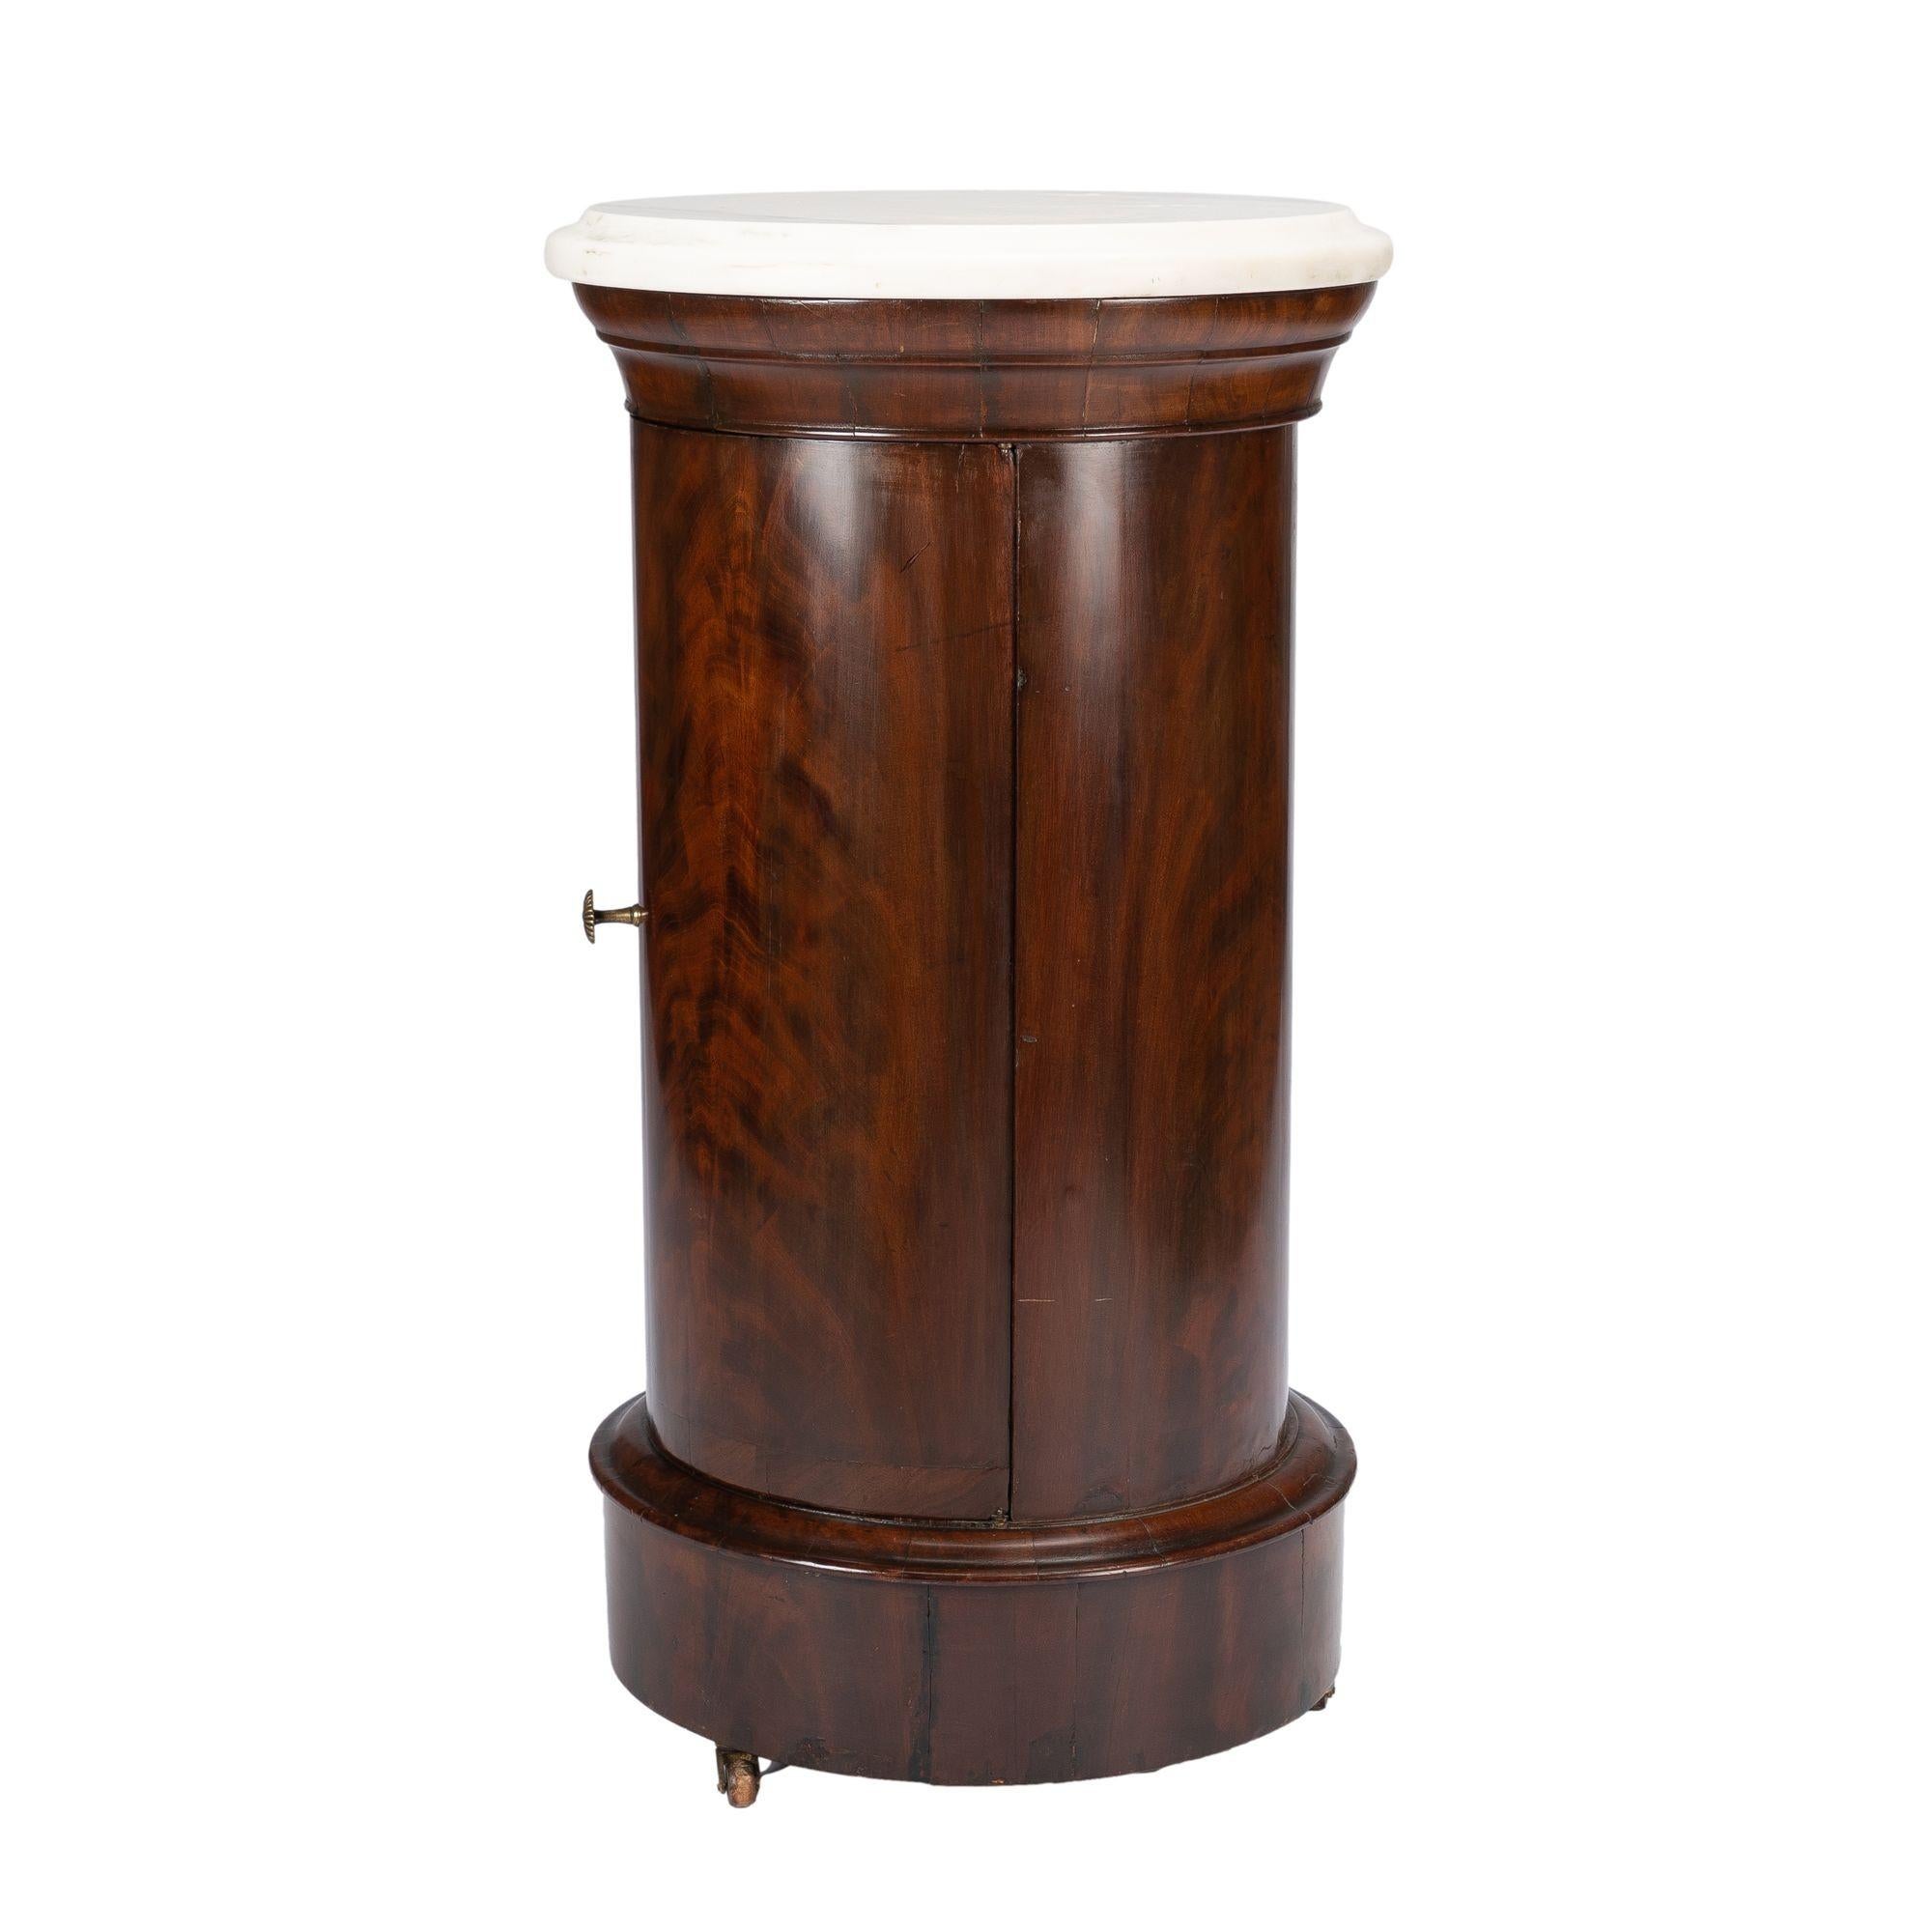 Mahogany pillar commode with a solid marble circular ogee edge top. The columnar shaft of the commode is fitted with two interior shelves, and the whole piece rests on a base molding with three brass castors. The commode is in fine original